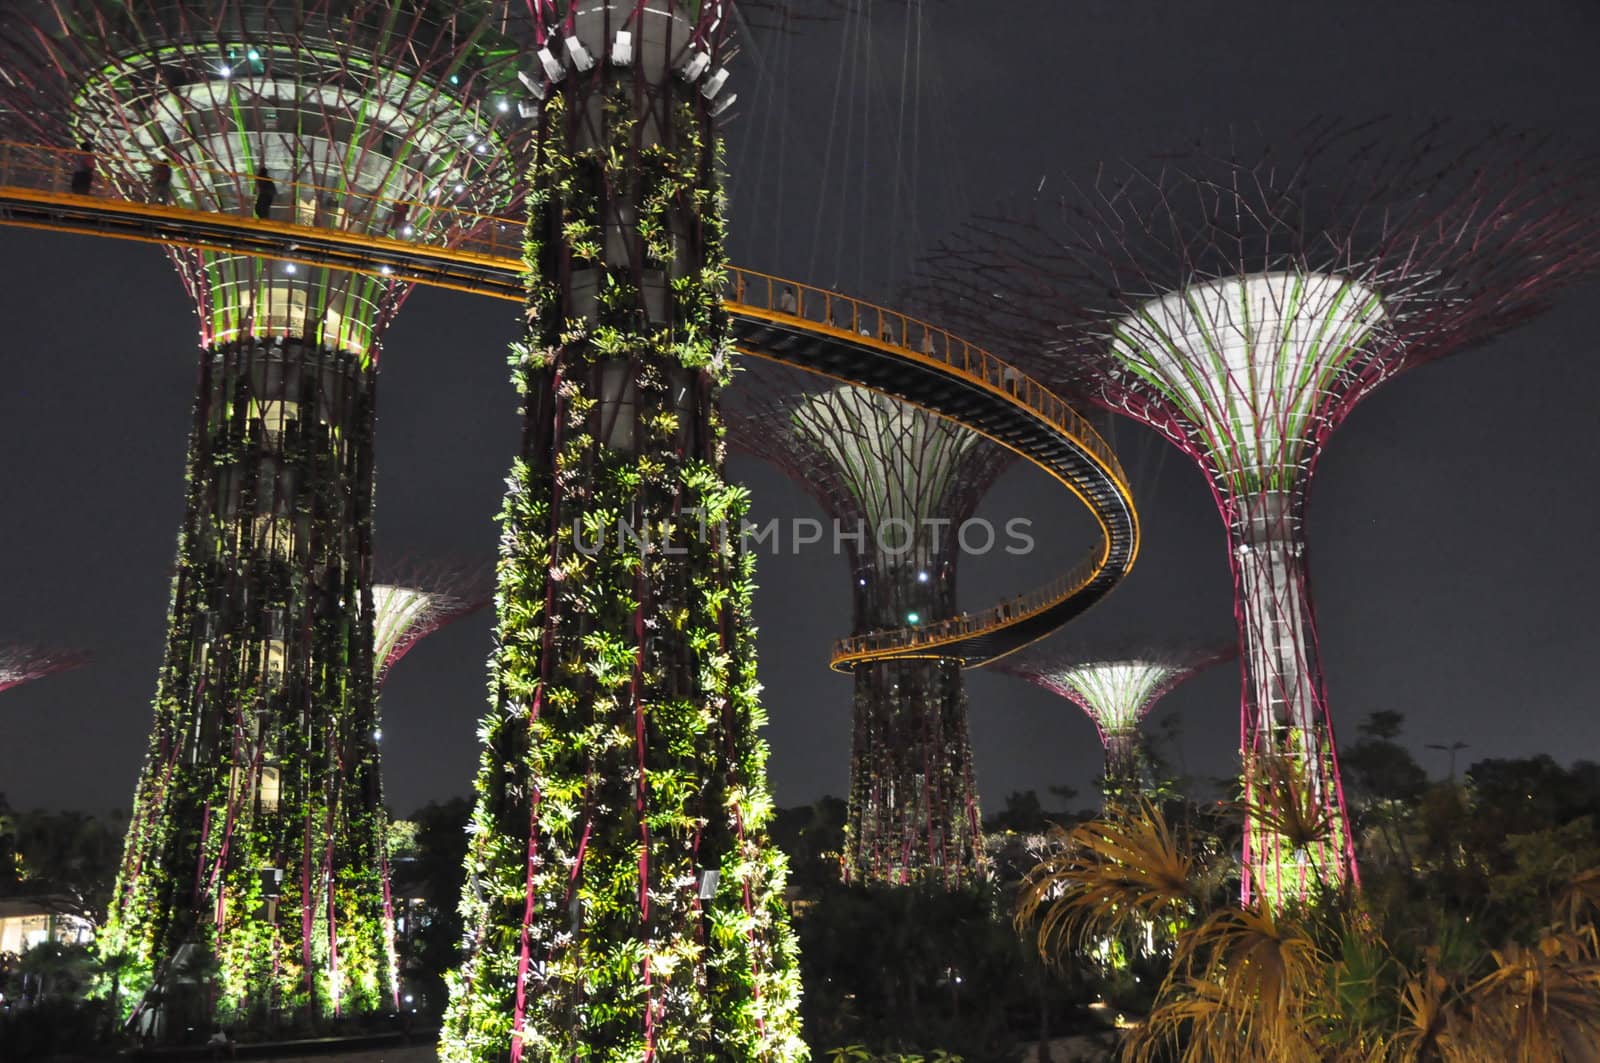 The Supertree Grove at Gardens by the Bay in Singapore by sainaniritu